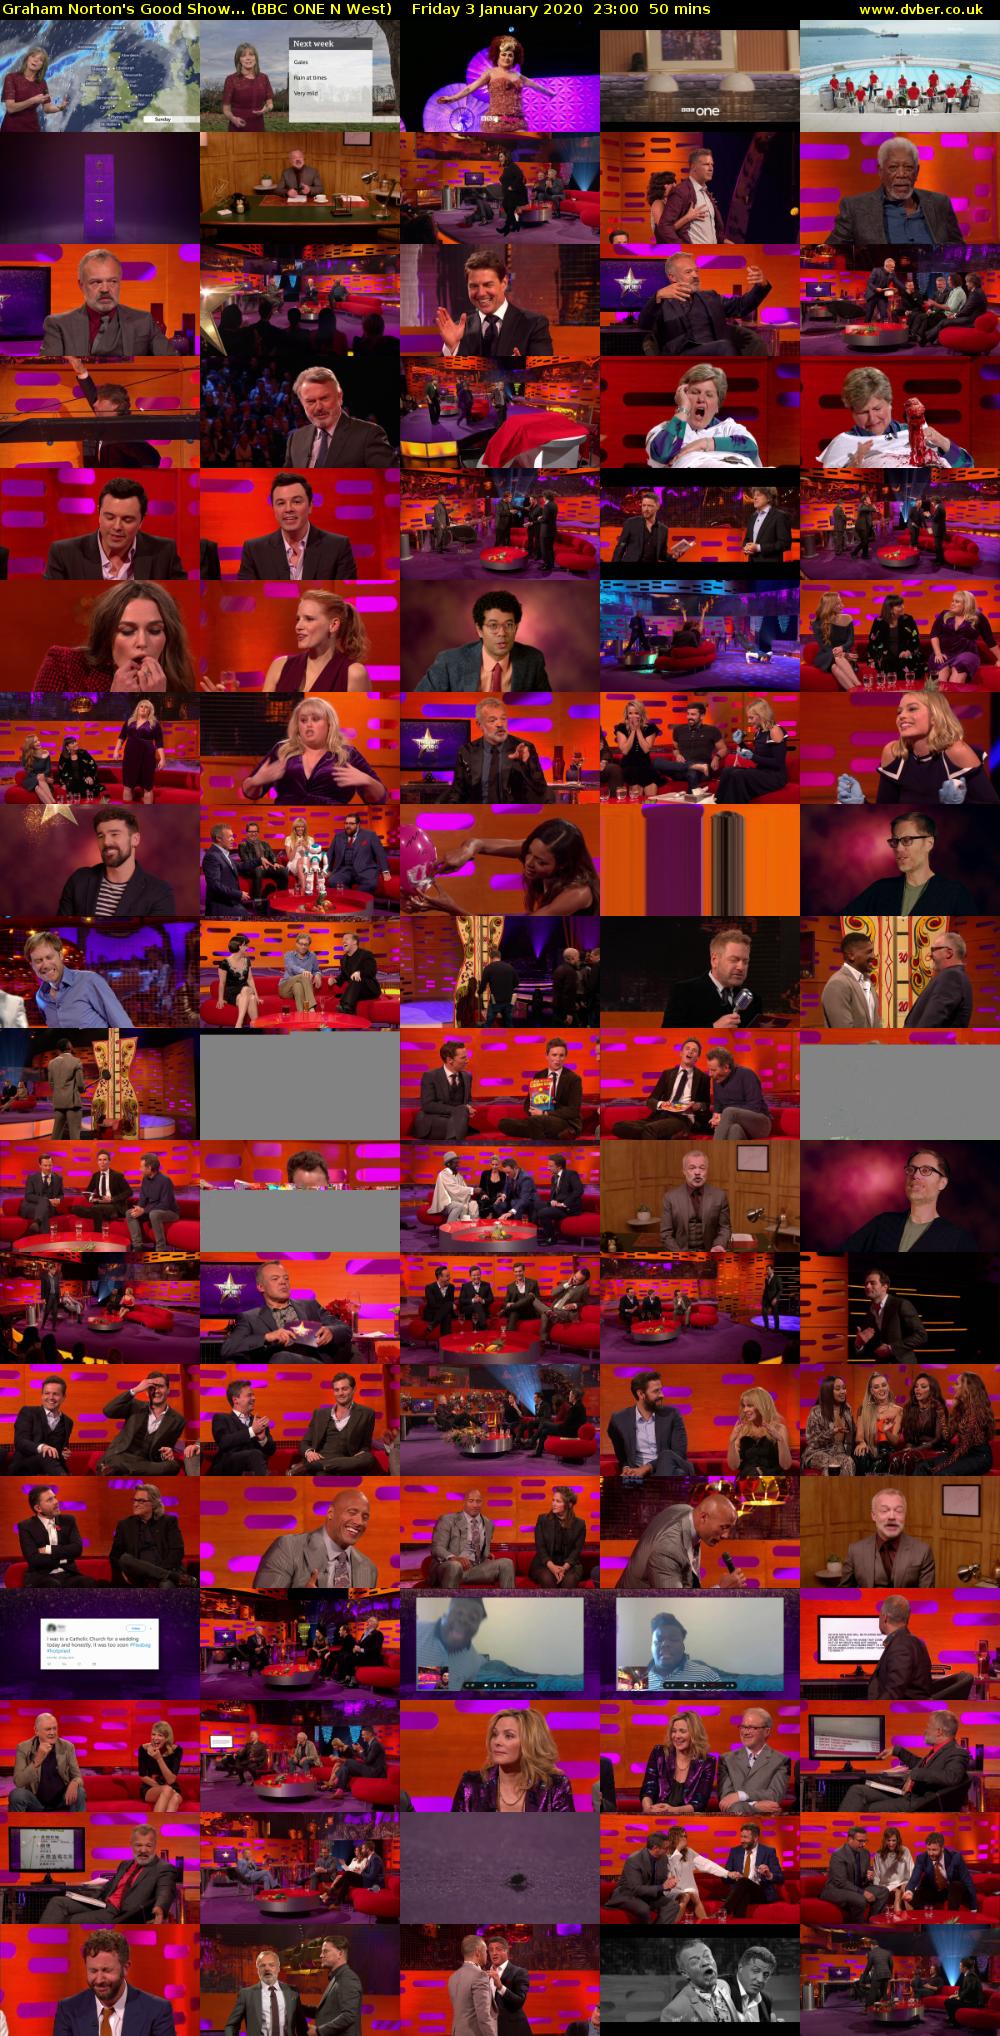 Graham Norton's Good Show... (BBC ONE N West) Friday 3 January 2020 23:00 - 23:50